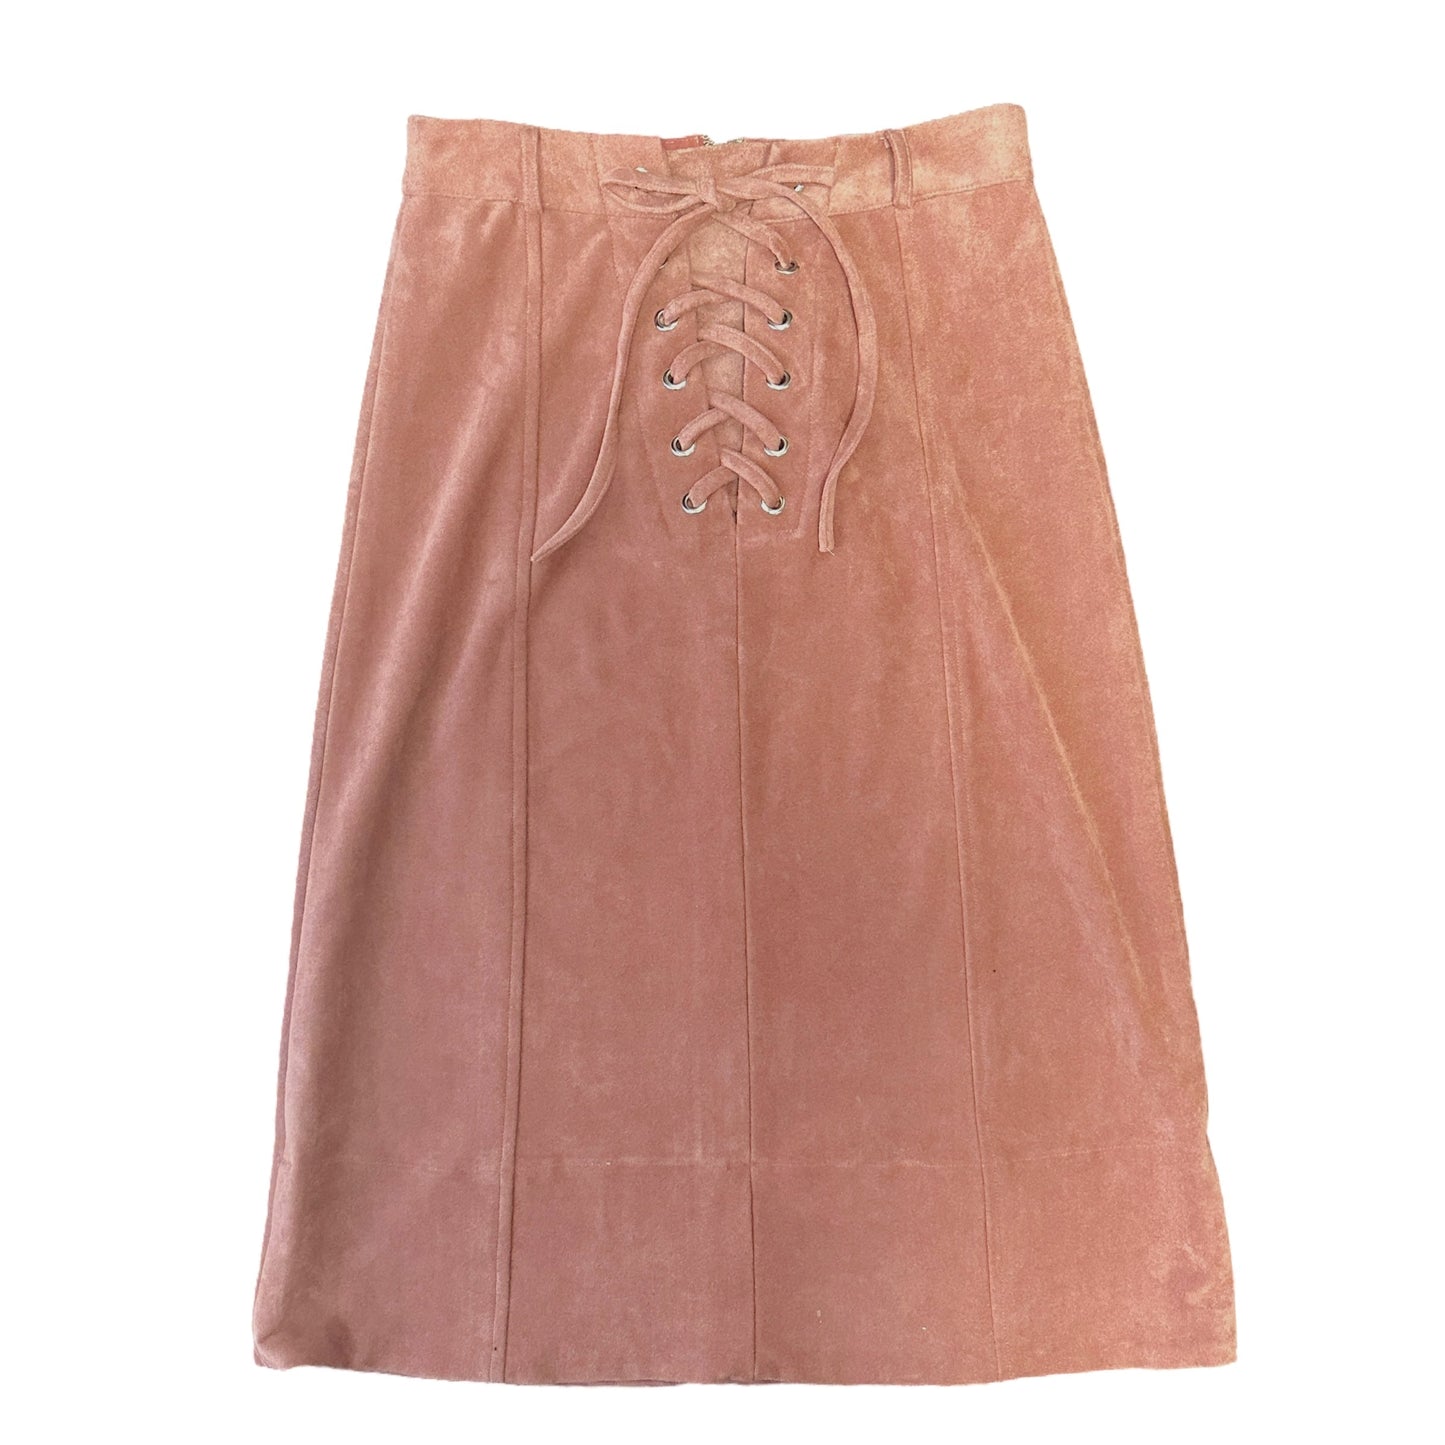 Microsuede Midi Skirt in Pink Endless Rose, Size M